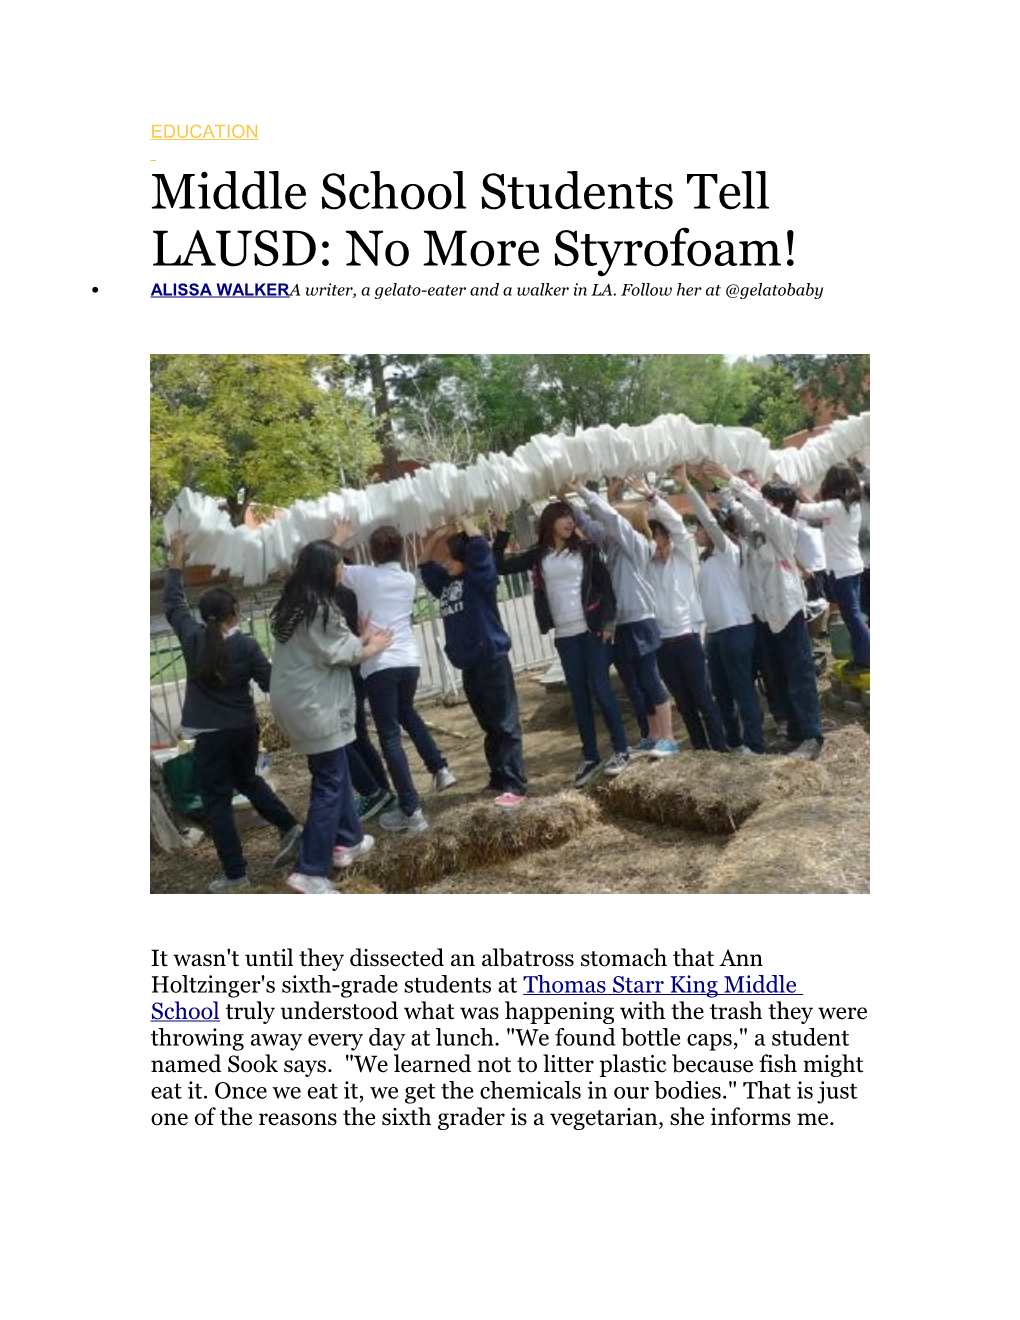 Middle School Students Tell LAUSD: No More Styrofoam!